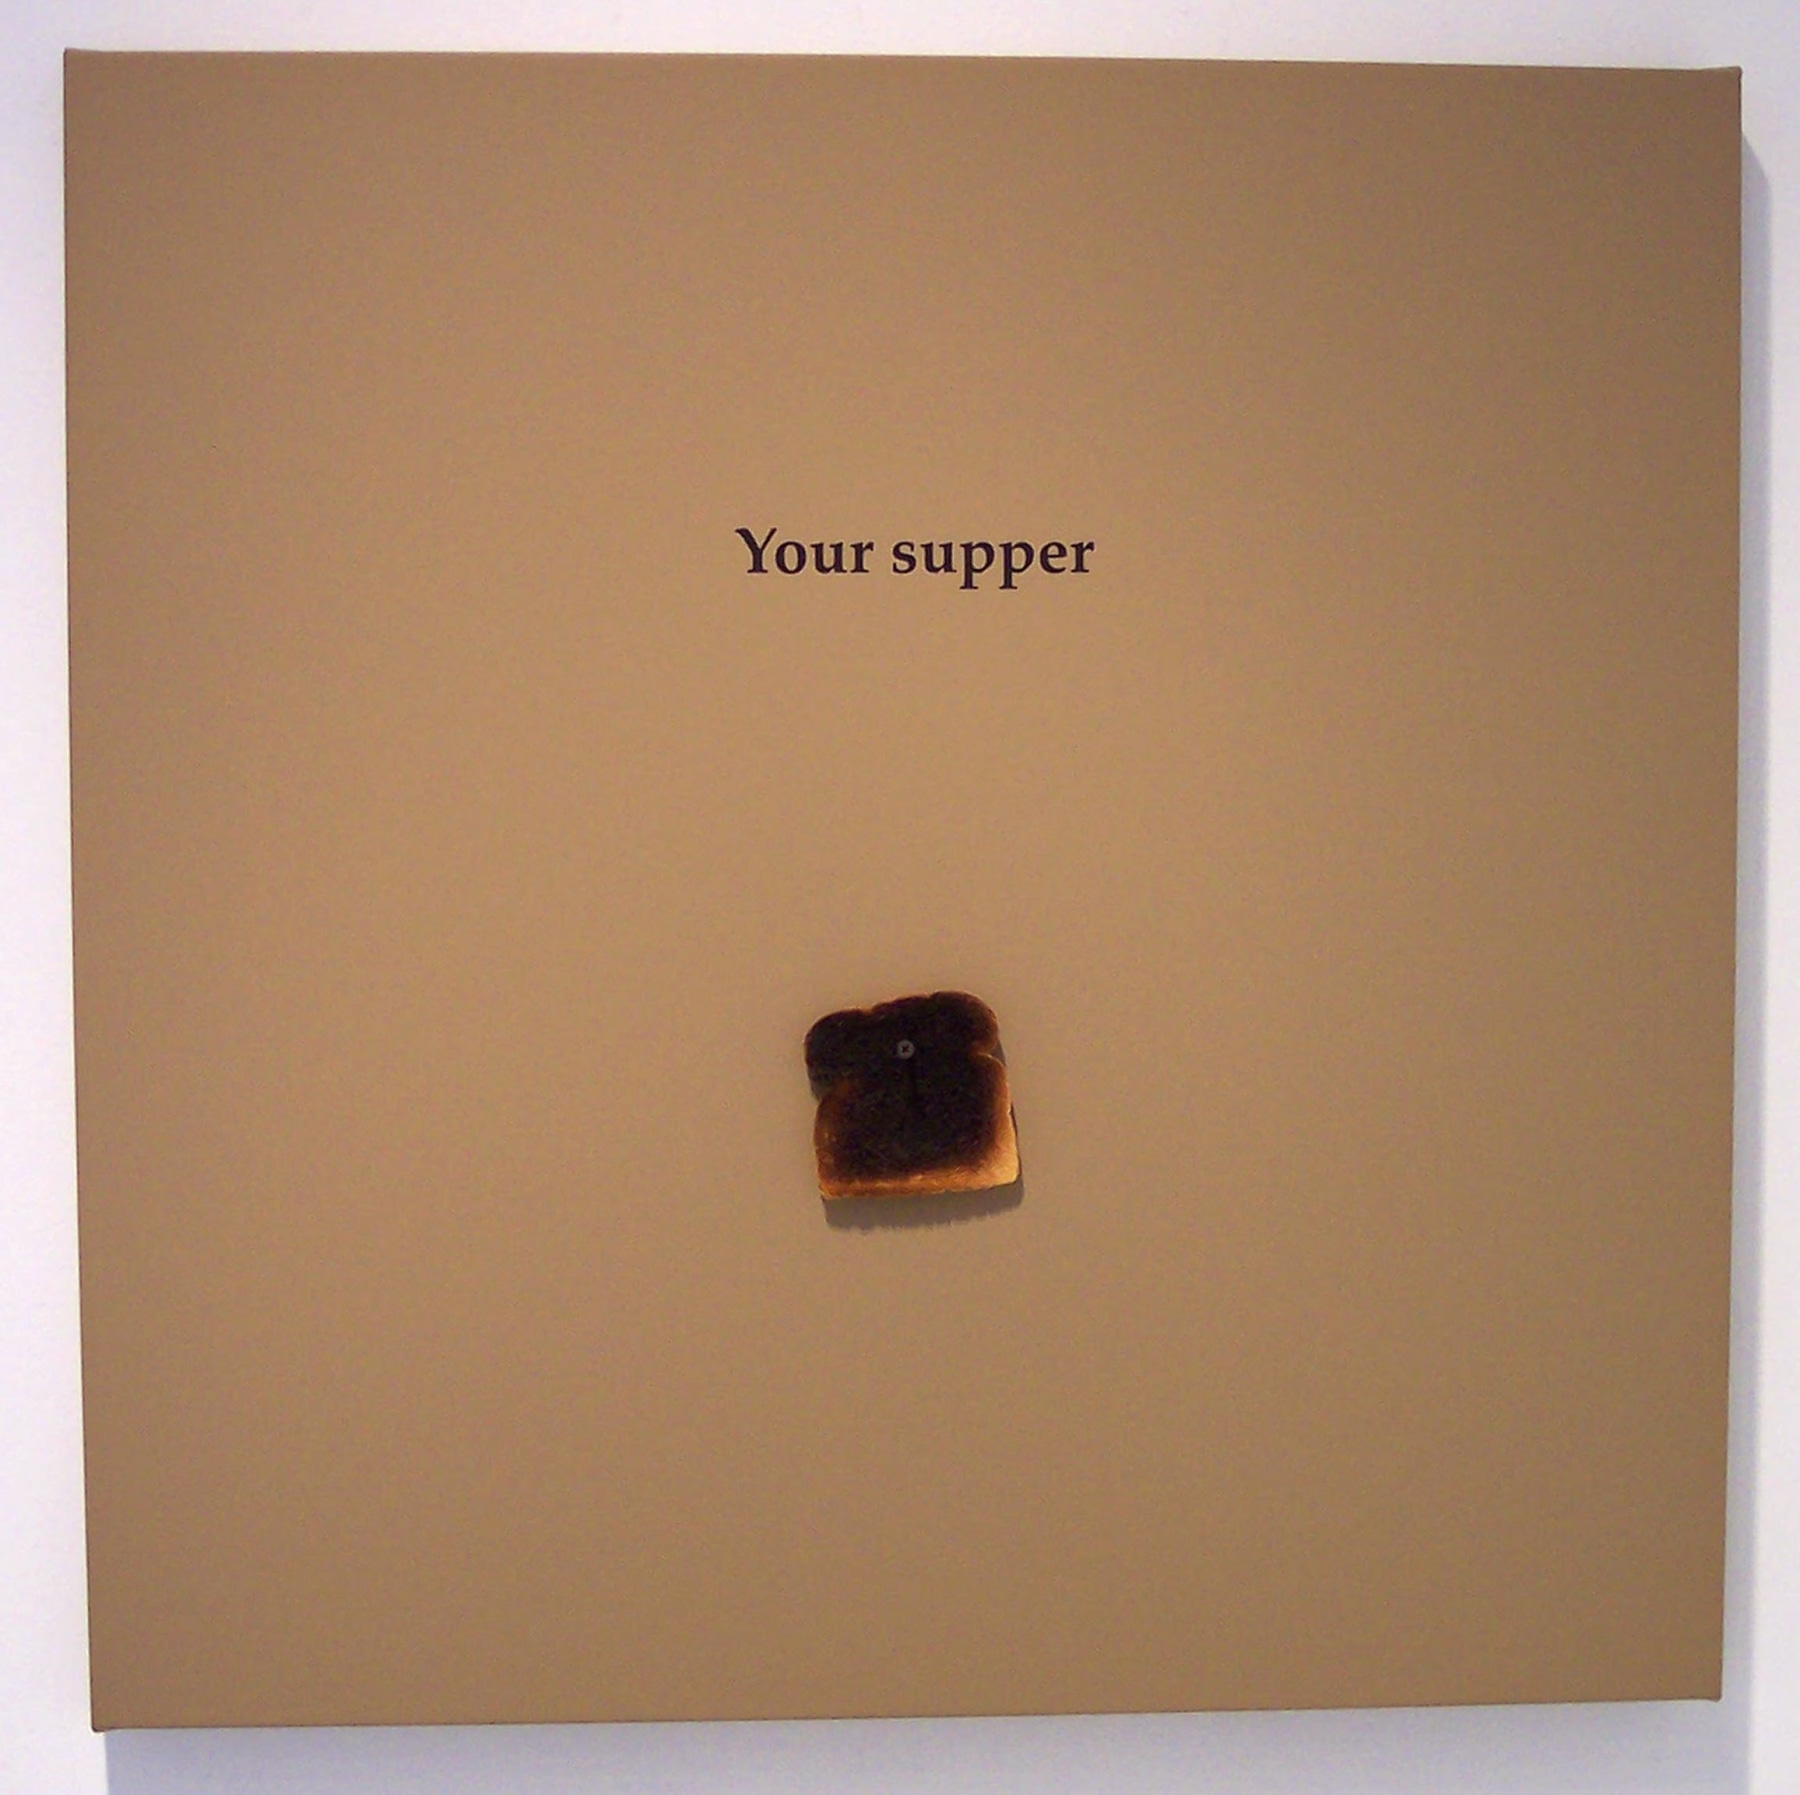 Toast on canvas, reading 'your supper'